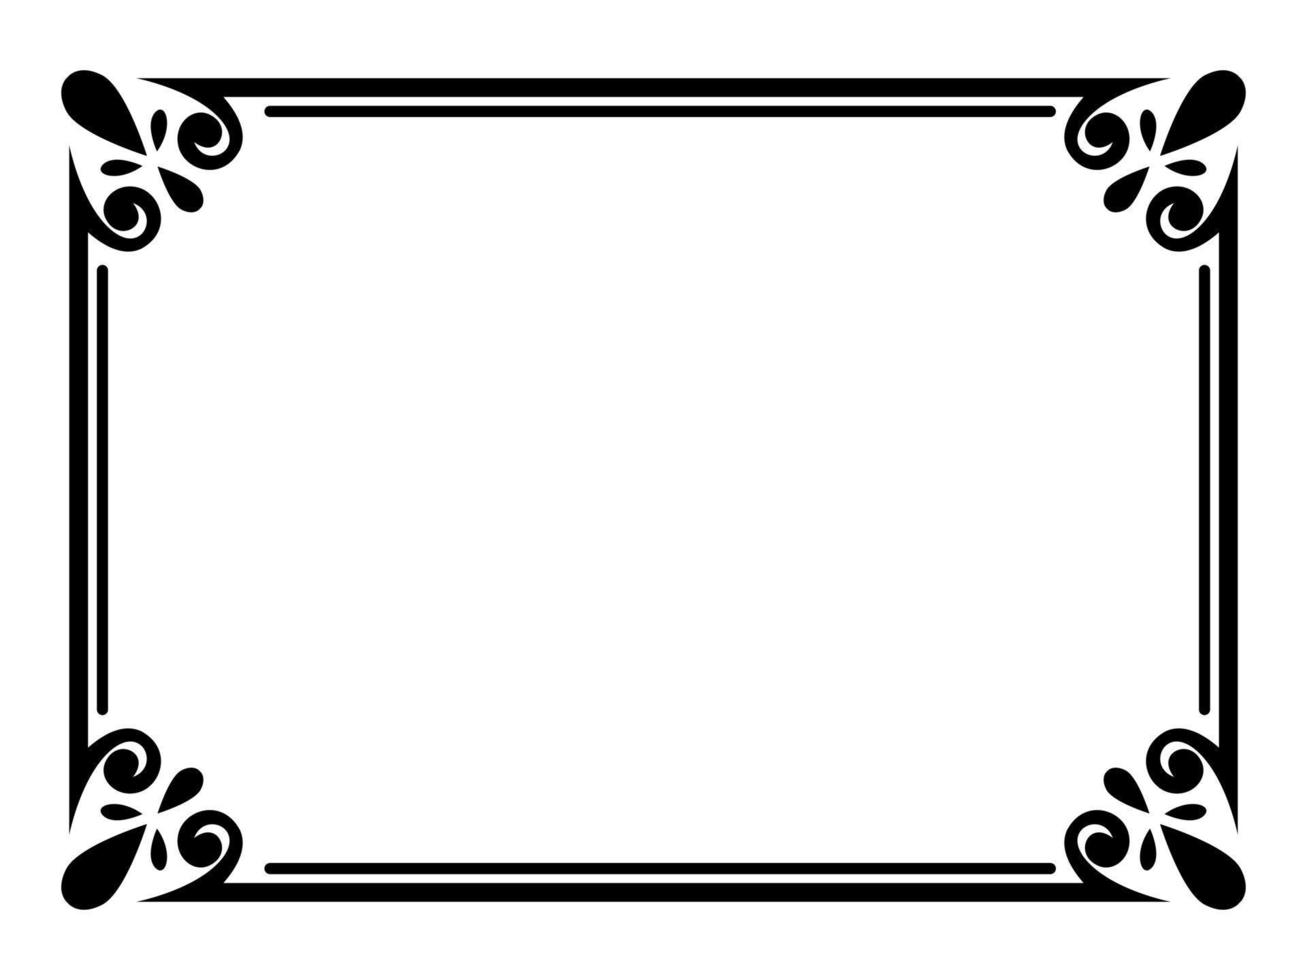 https://static.vecteezy.com/system/resources/previews/009/210/376/non_2x/decorative-simple-frame-rectangle-vector.jpg